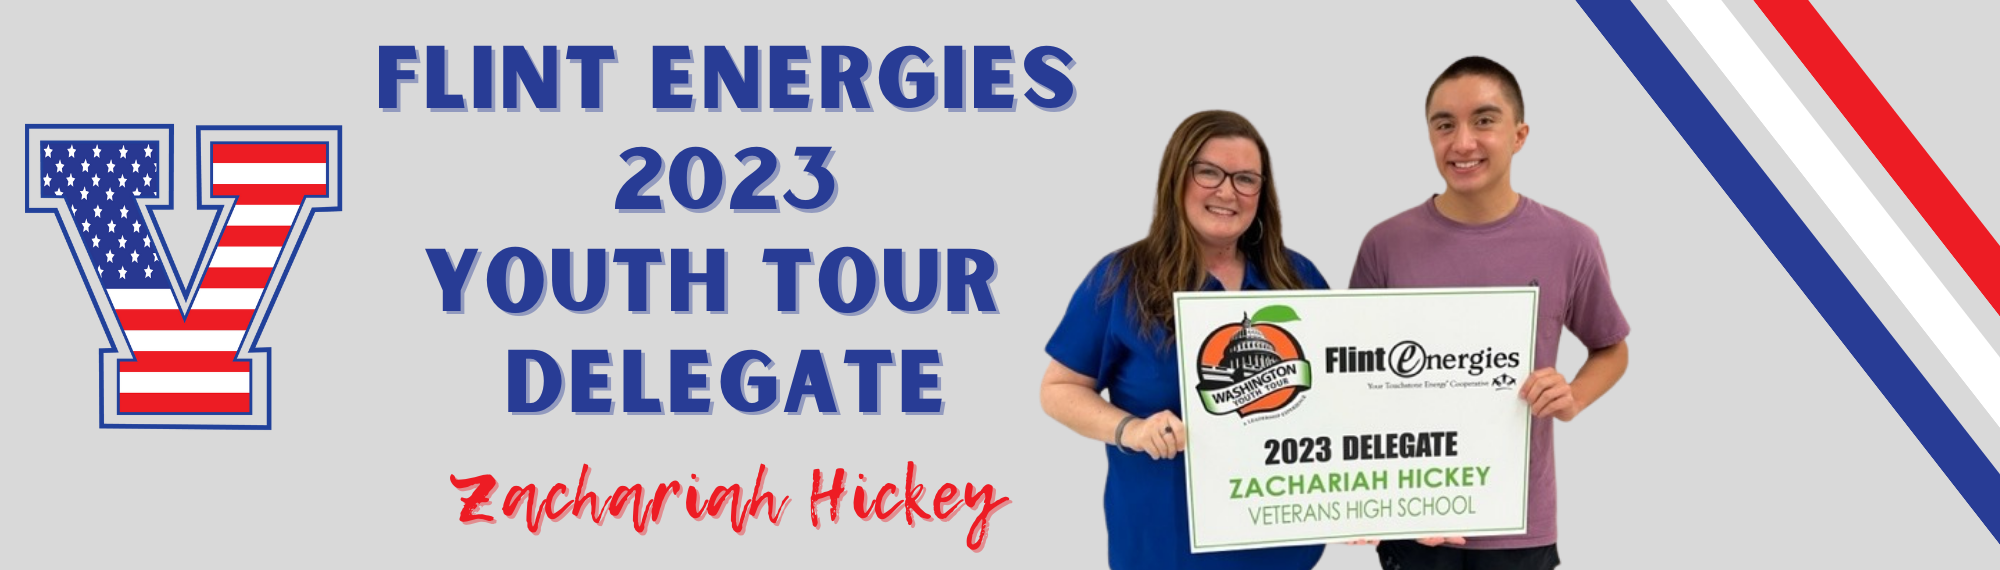 2023 Flint Energies Youth Tours Delegate